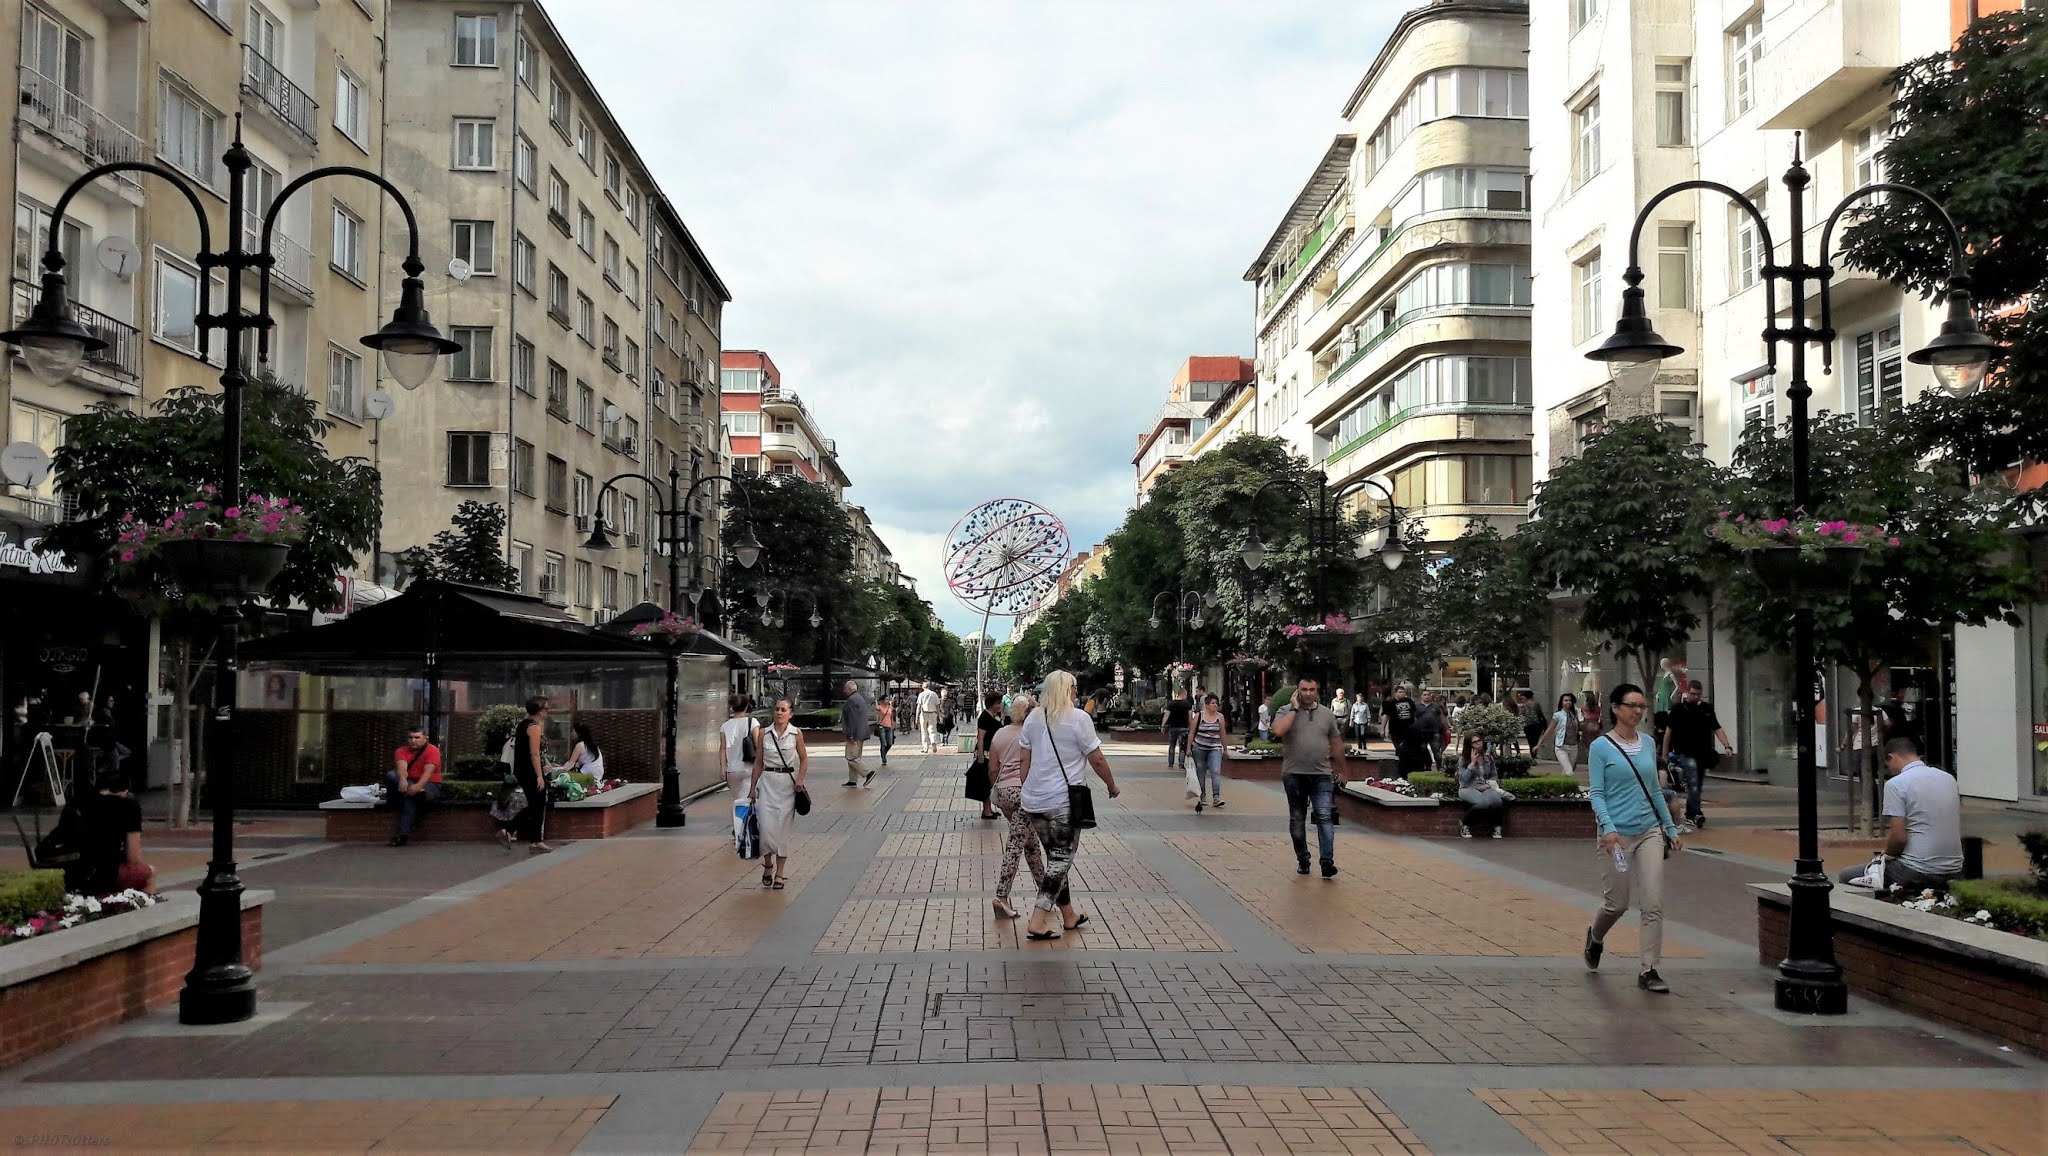 View of the pedestrian road Vitosha Boulevard full of people walking and shopping